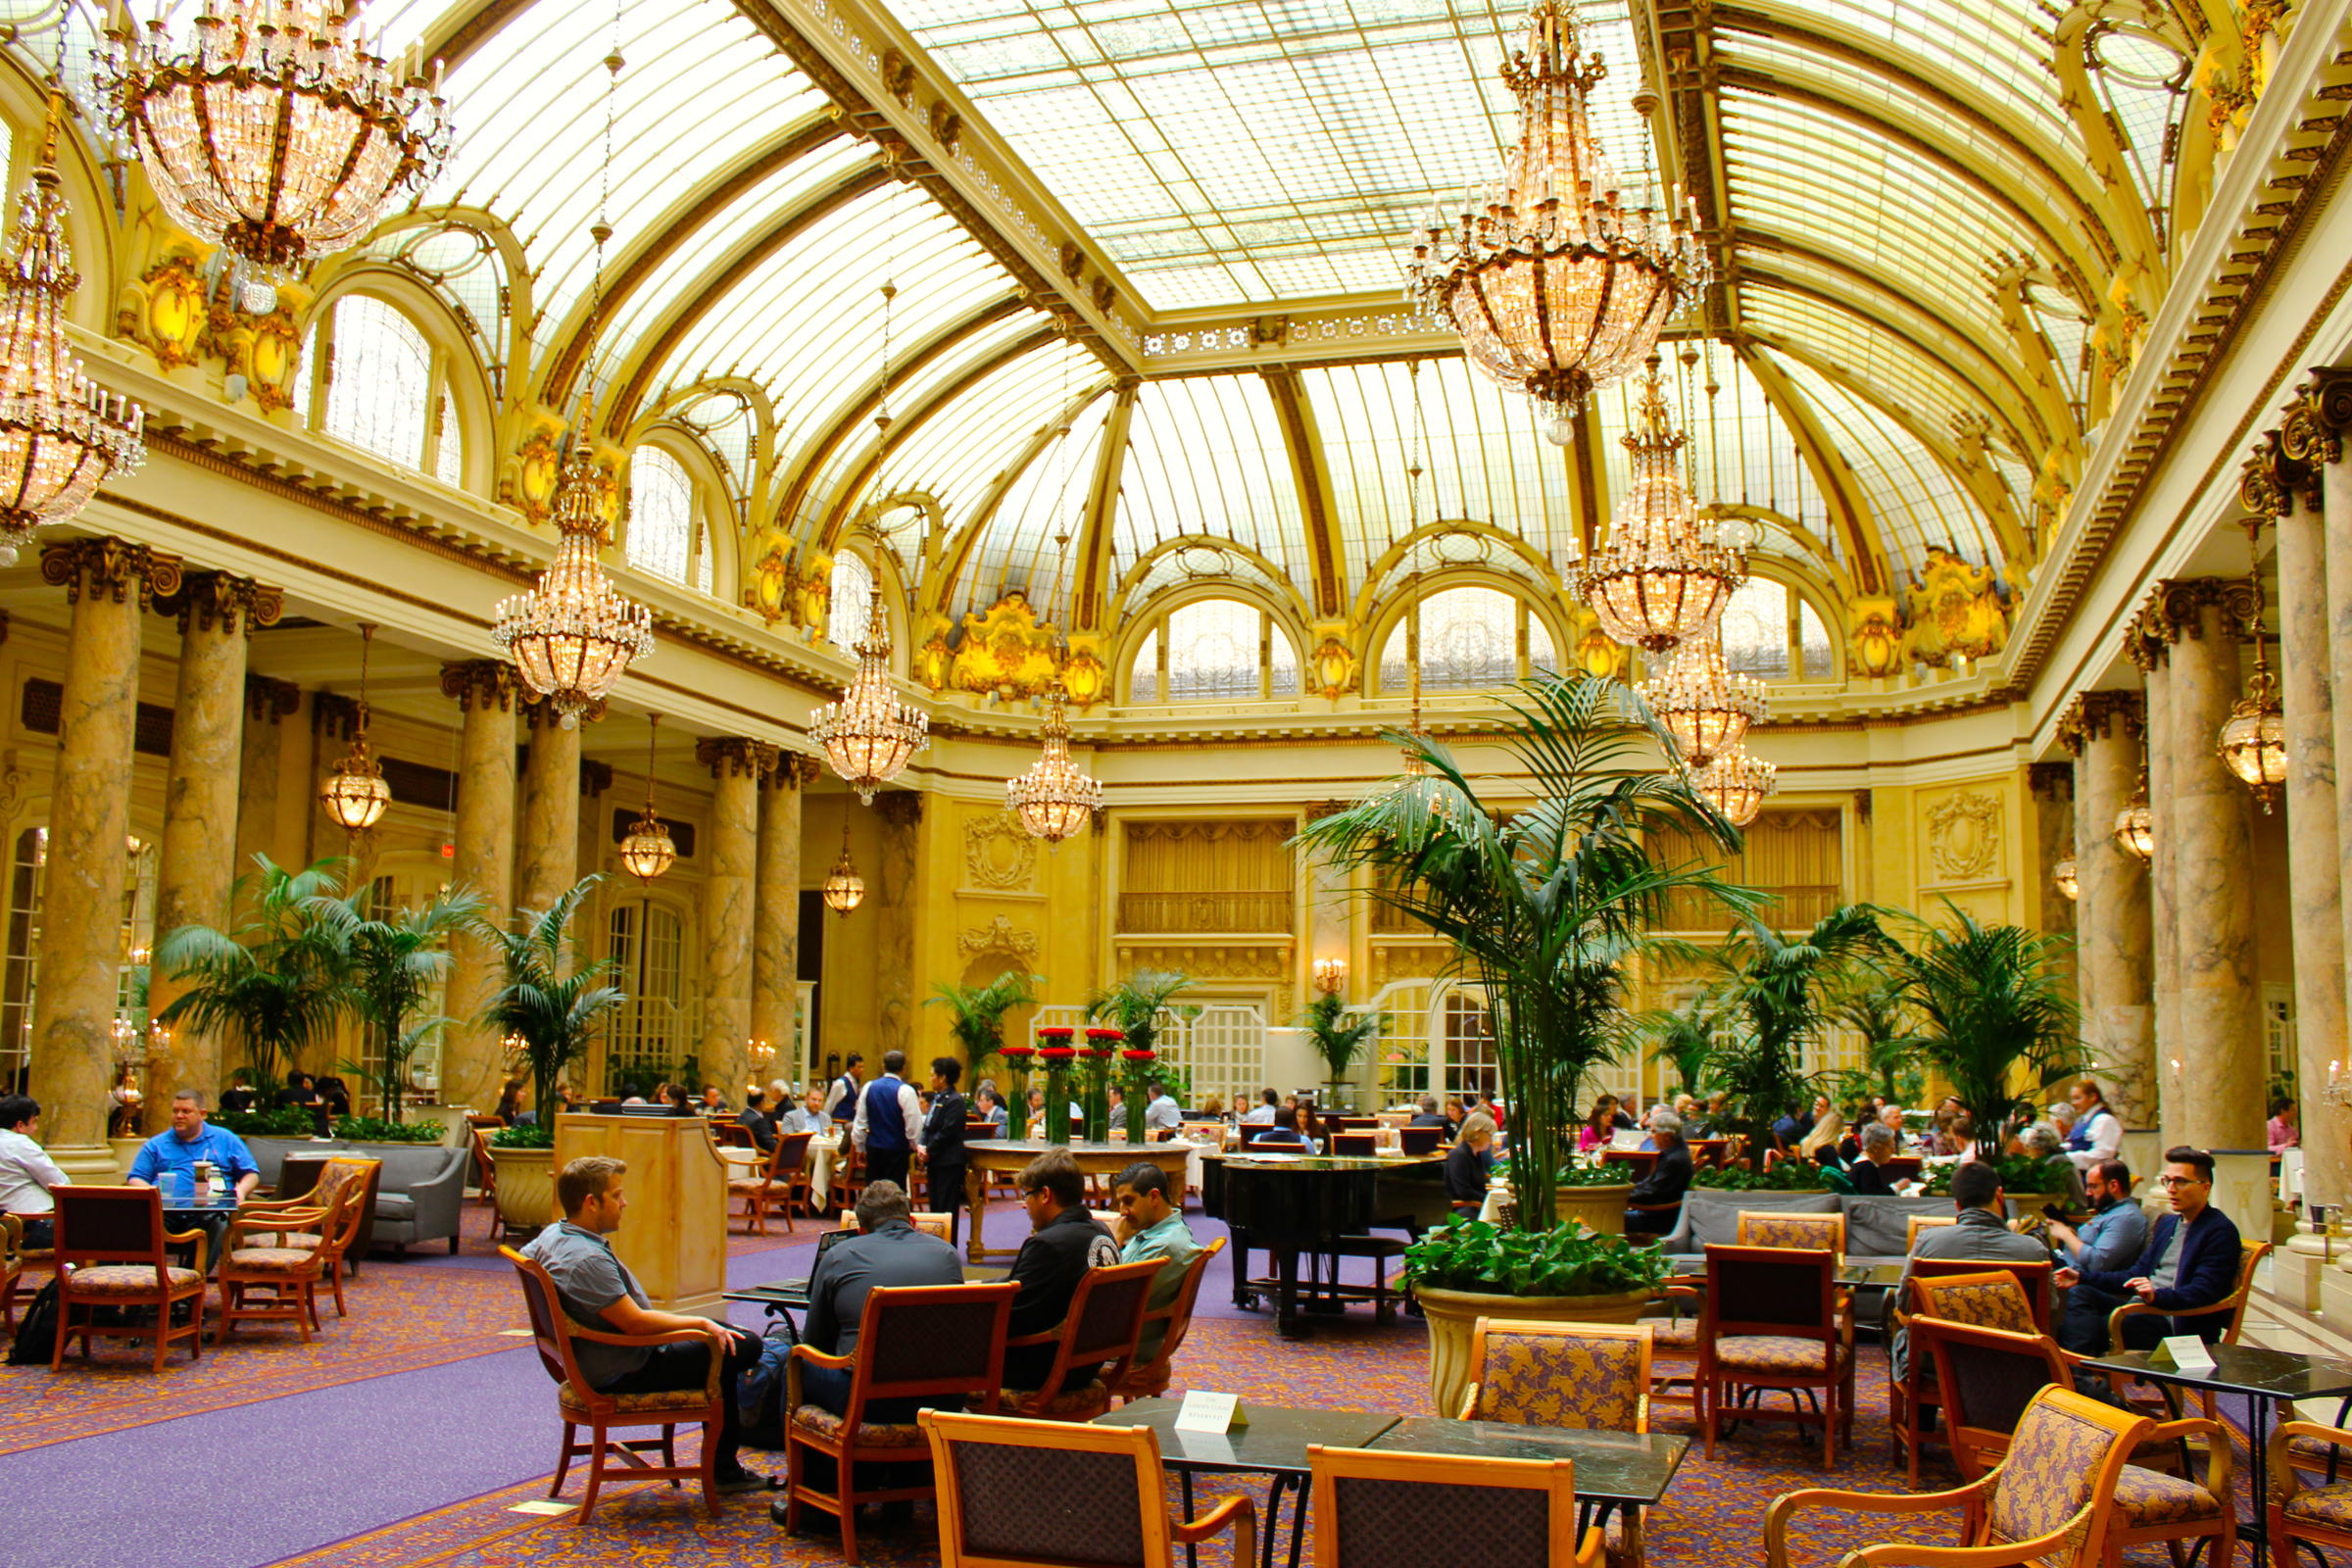 San Francisco’s Palace Hotel—awarded “Best Historic Hotel in America